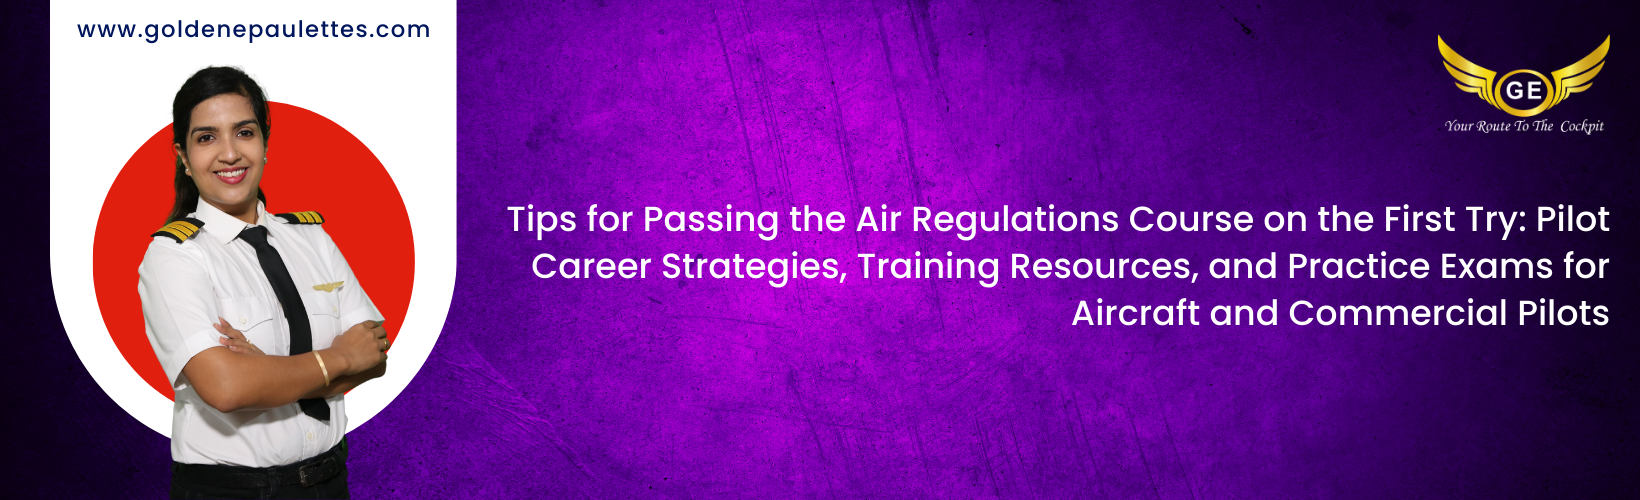 The Role of Air Regulations in Commercial Pilot Safety